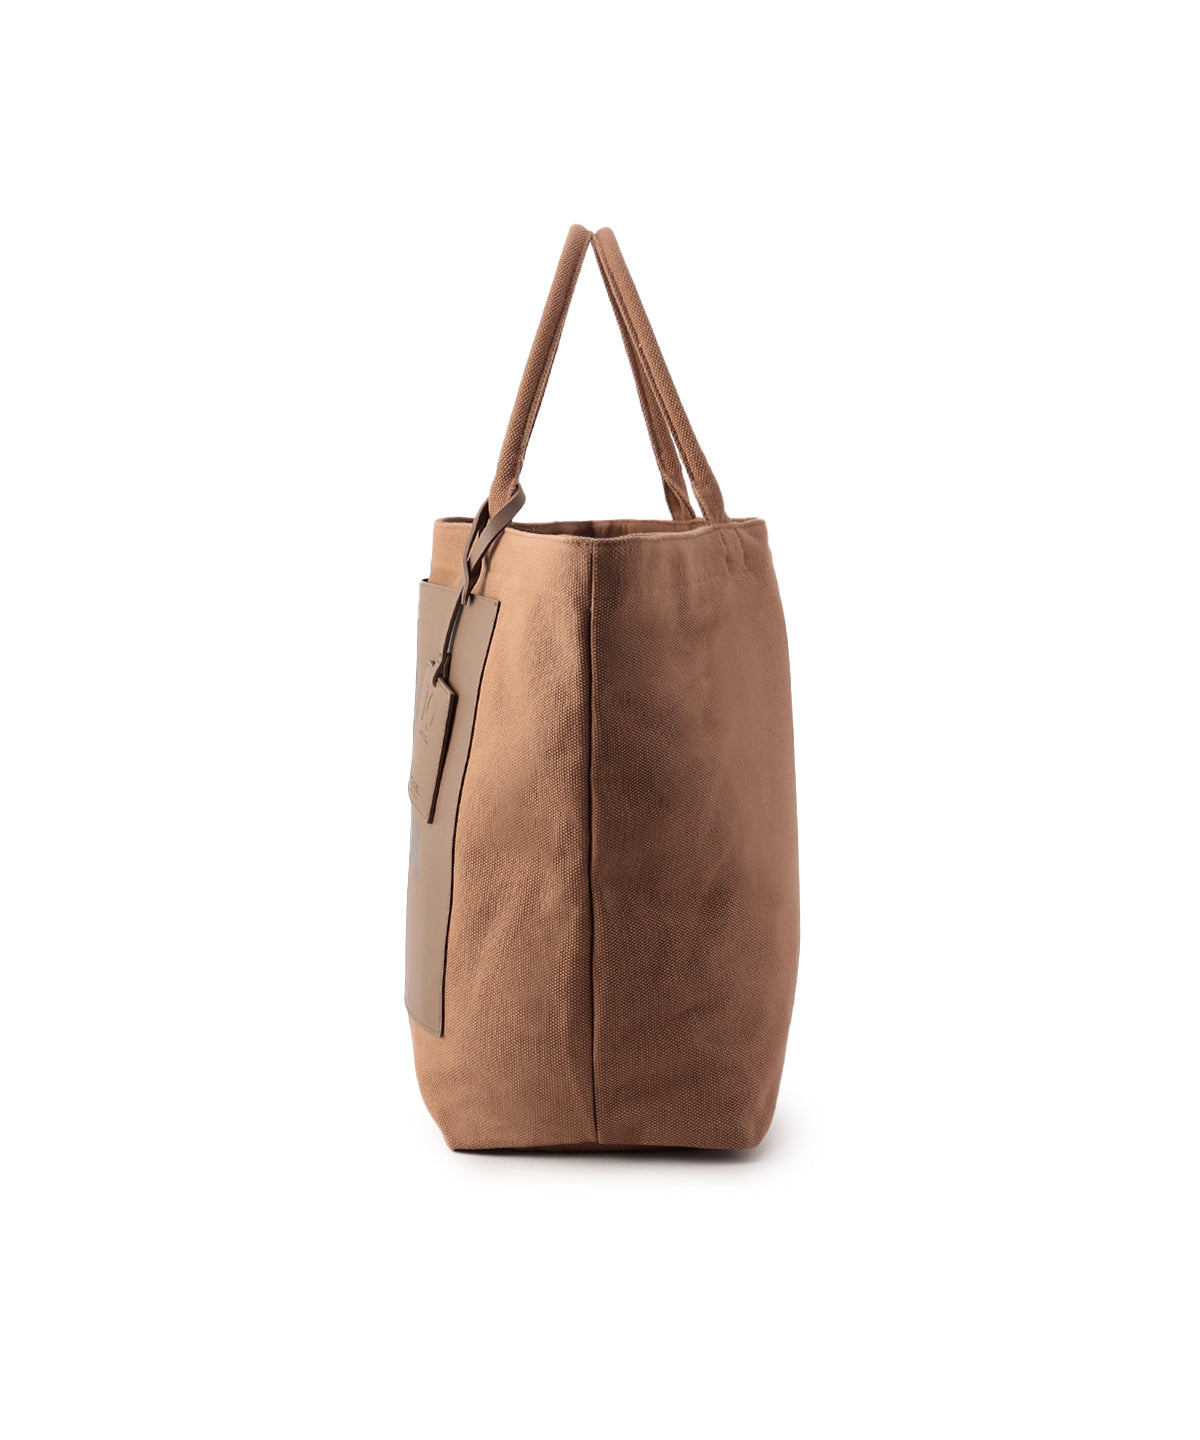 Colored Canvas Tote (Large) BROWN